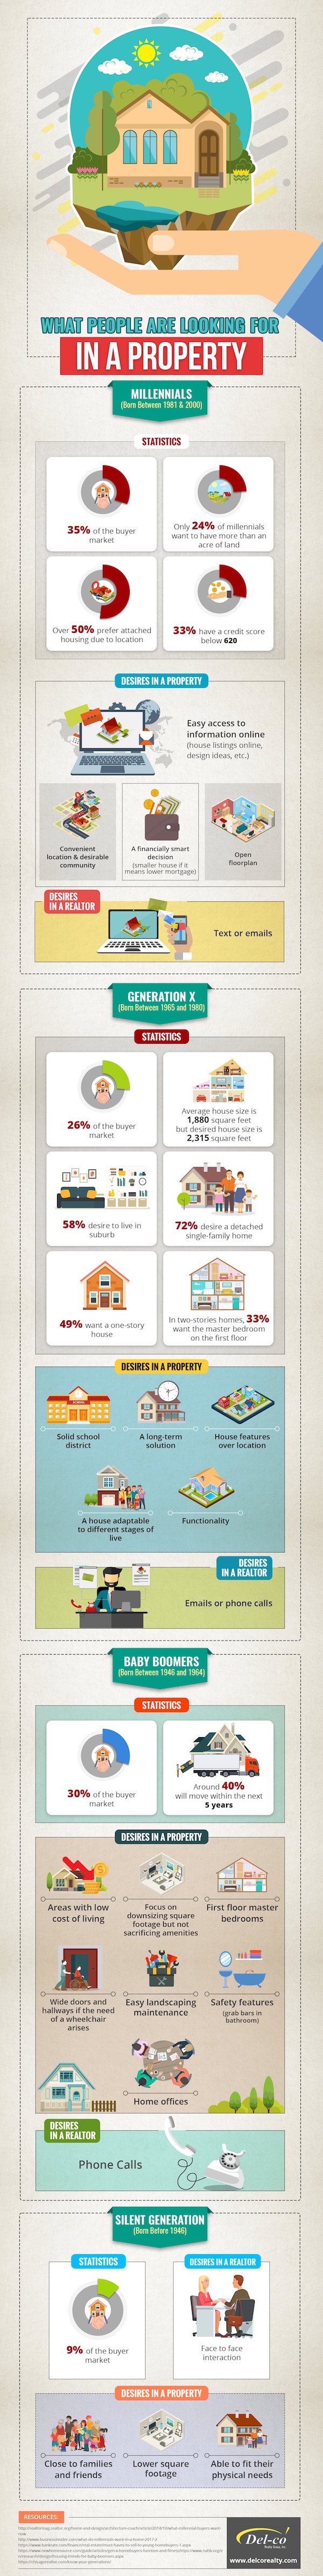 del-co realty looking for in a property infographic